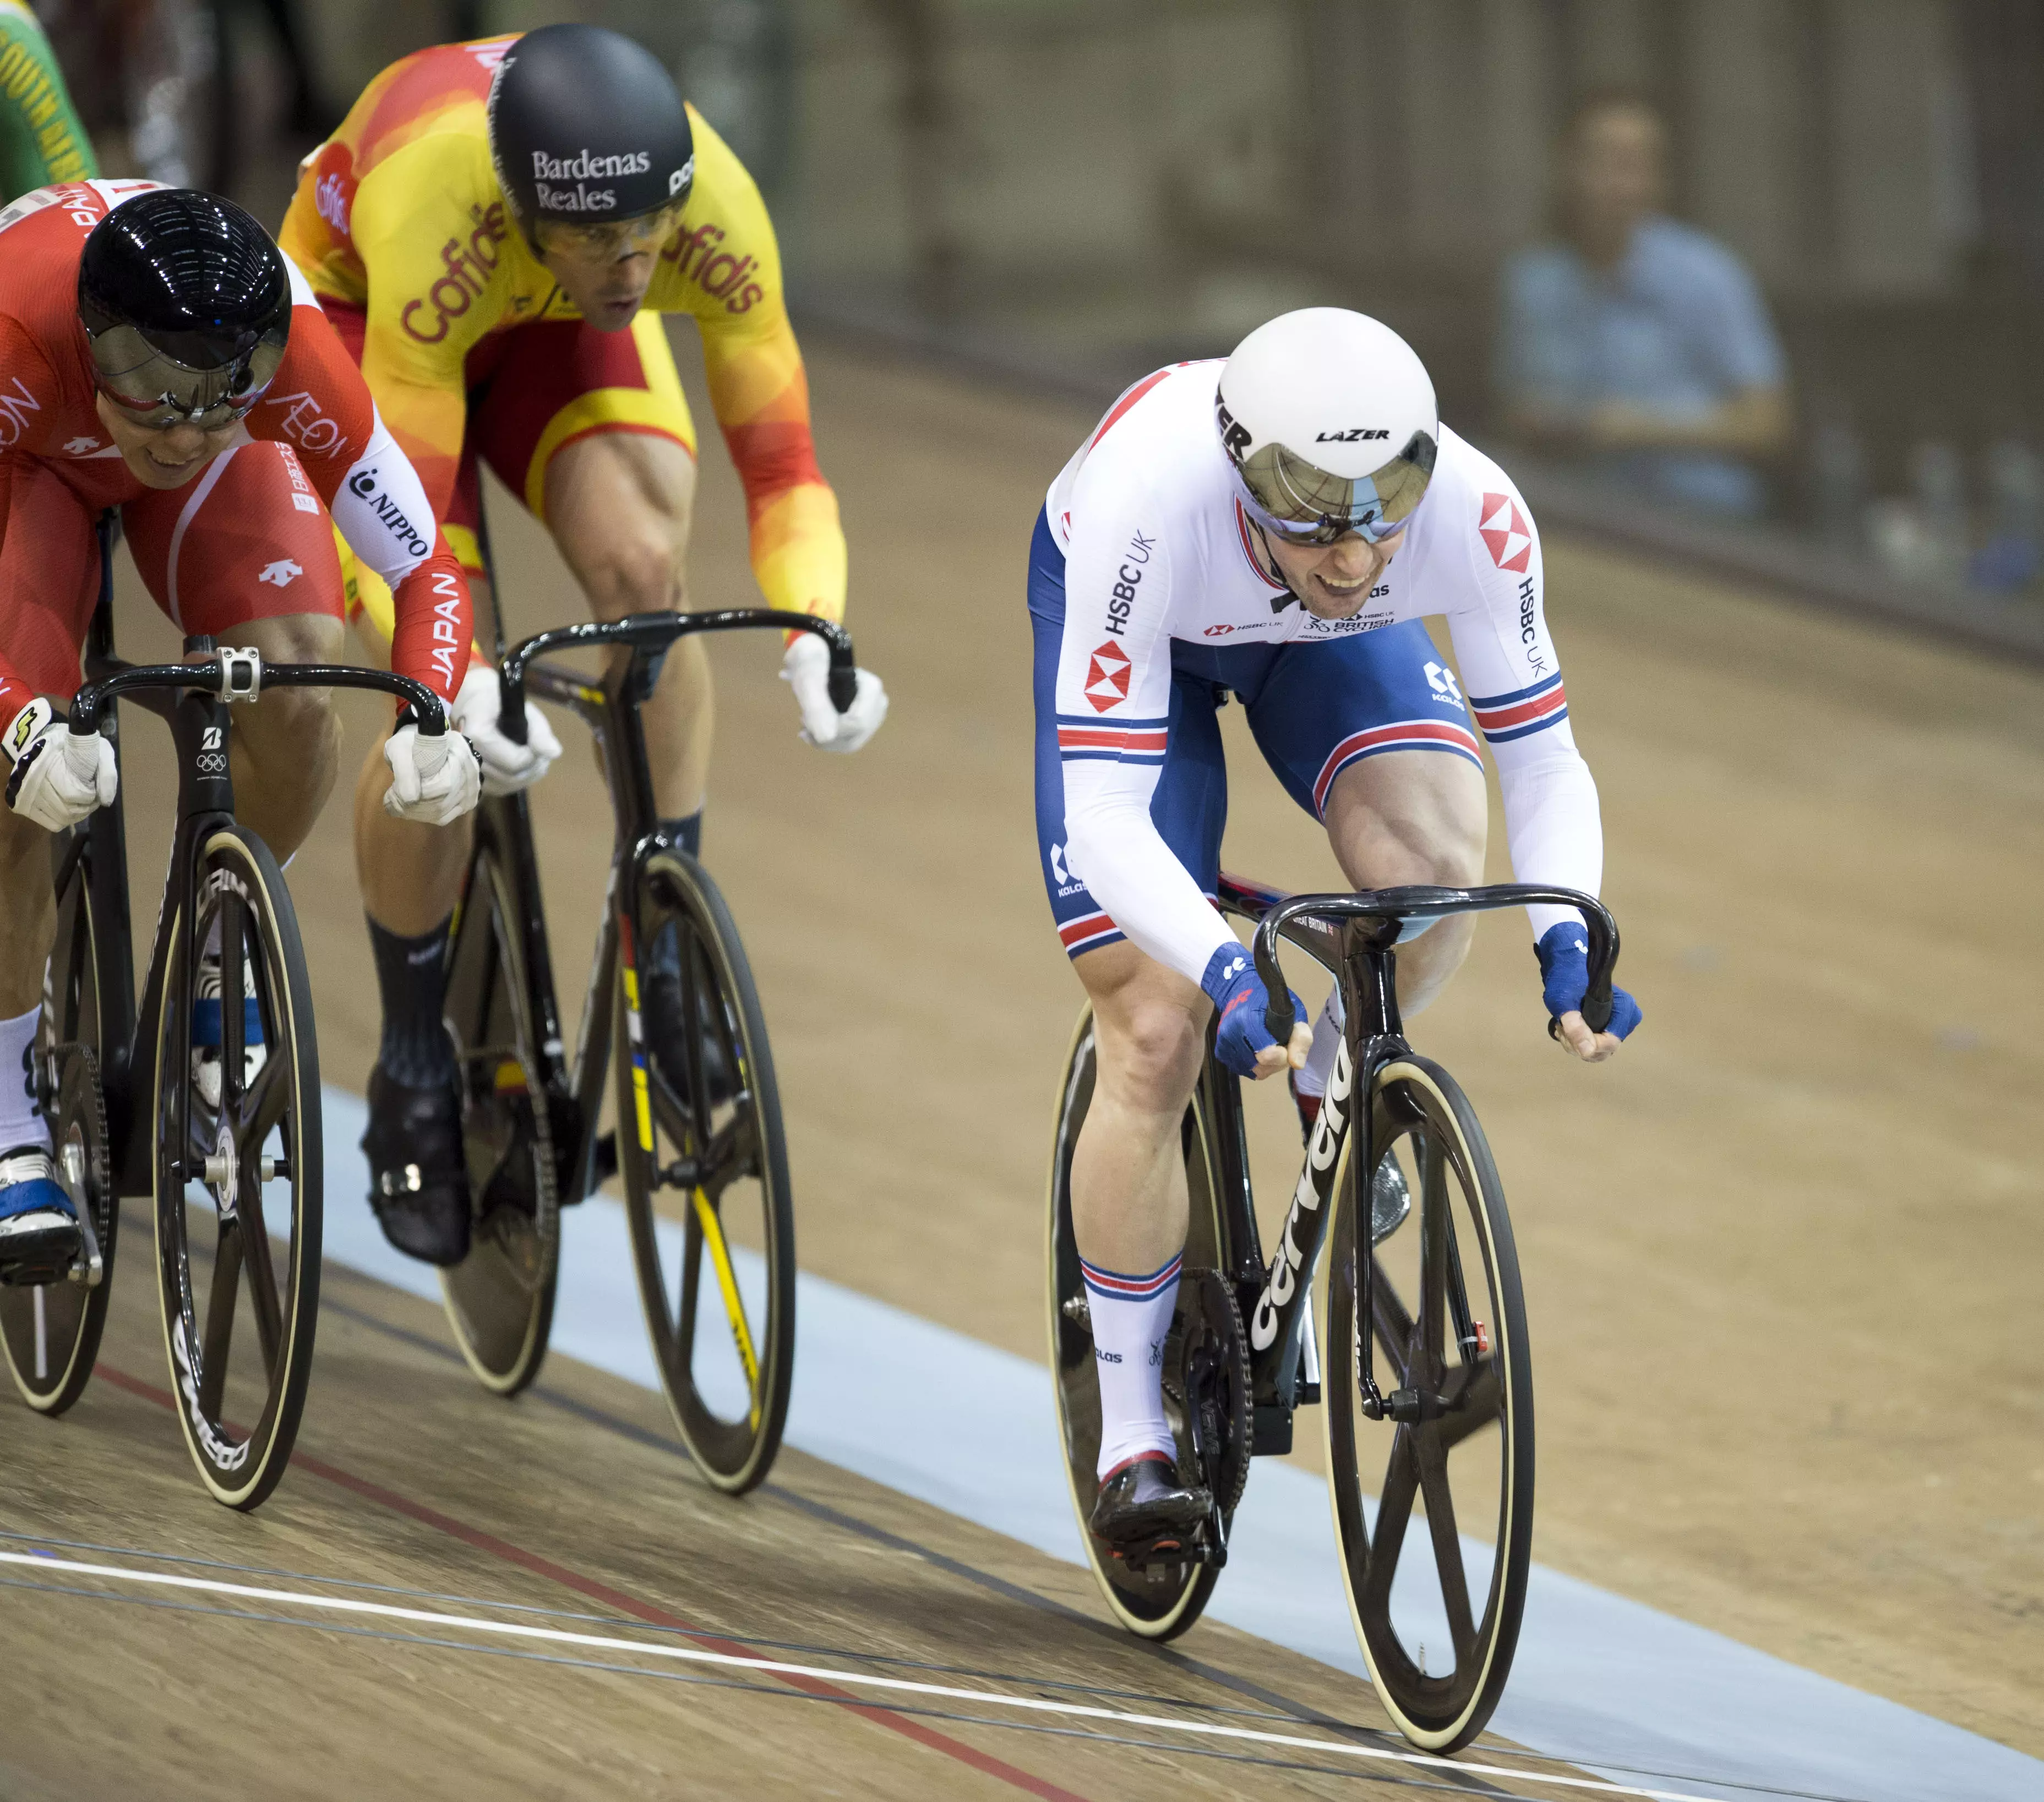 Jason Kenny competing at the 2019 UCI Track Cycling World Cup. (